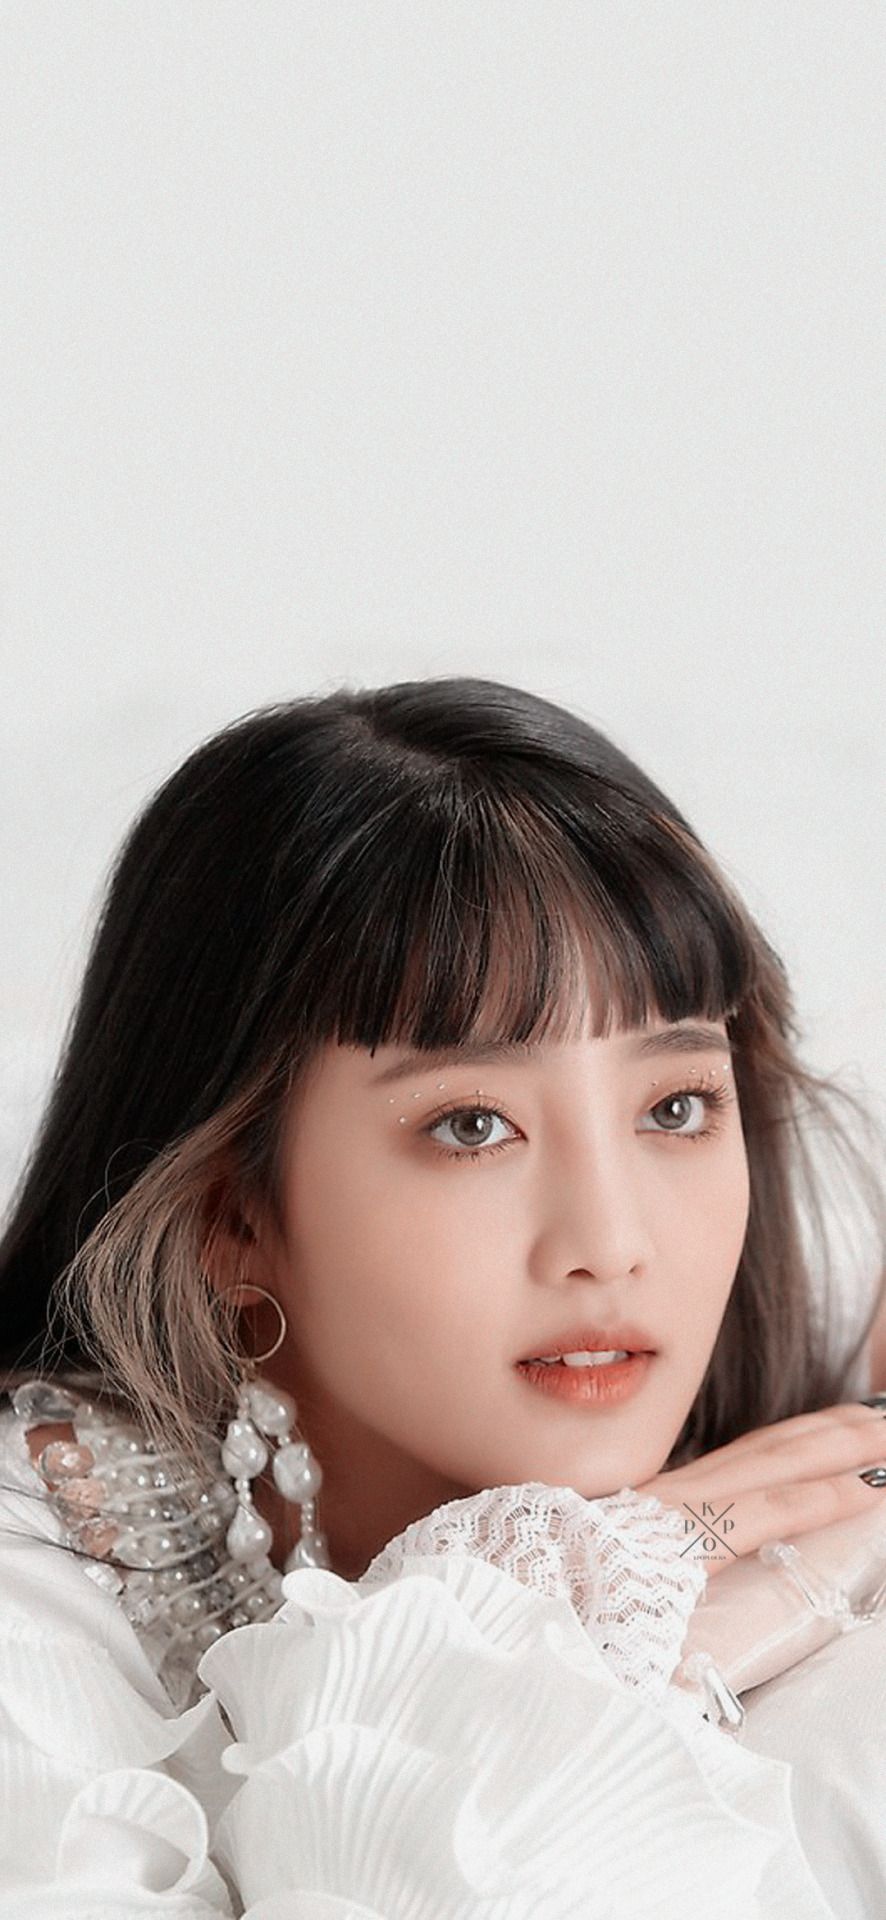 Minnie G Idle Wallpapers